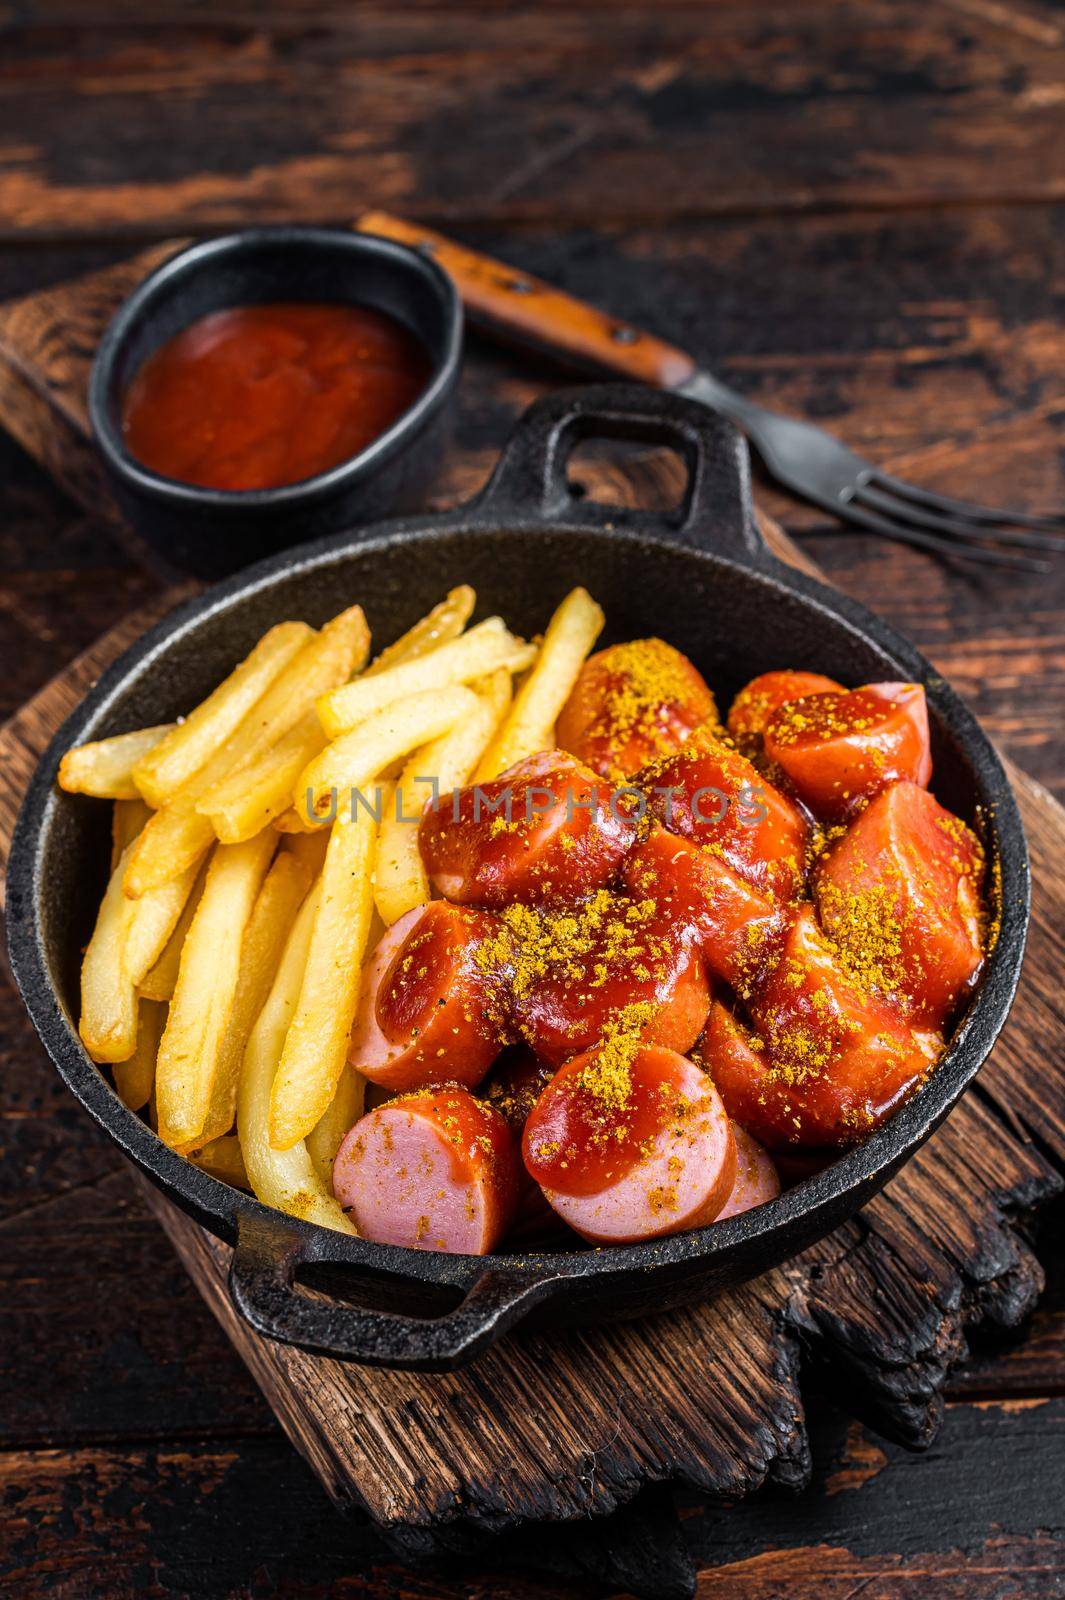 Currywurst street food meal, Curry spice on wursts served French fries in a pan. Dark wooden background. Top view by Composter